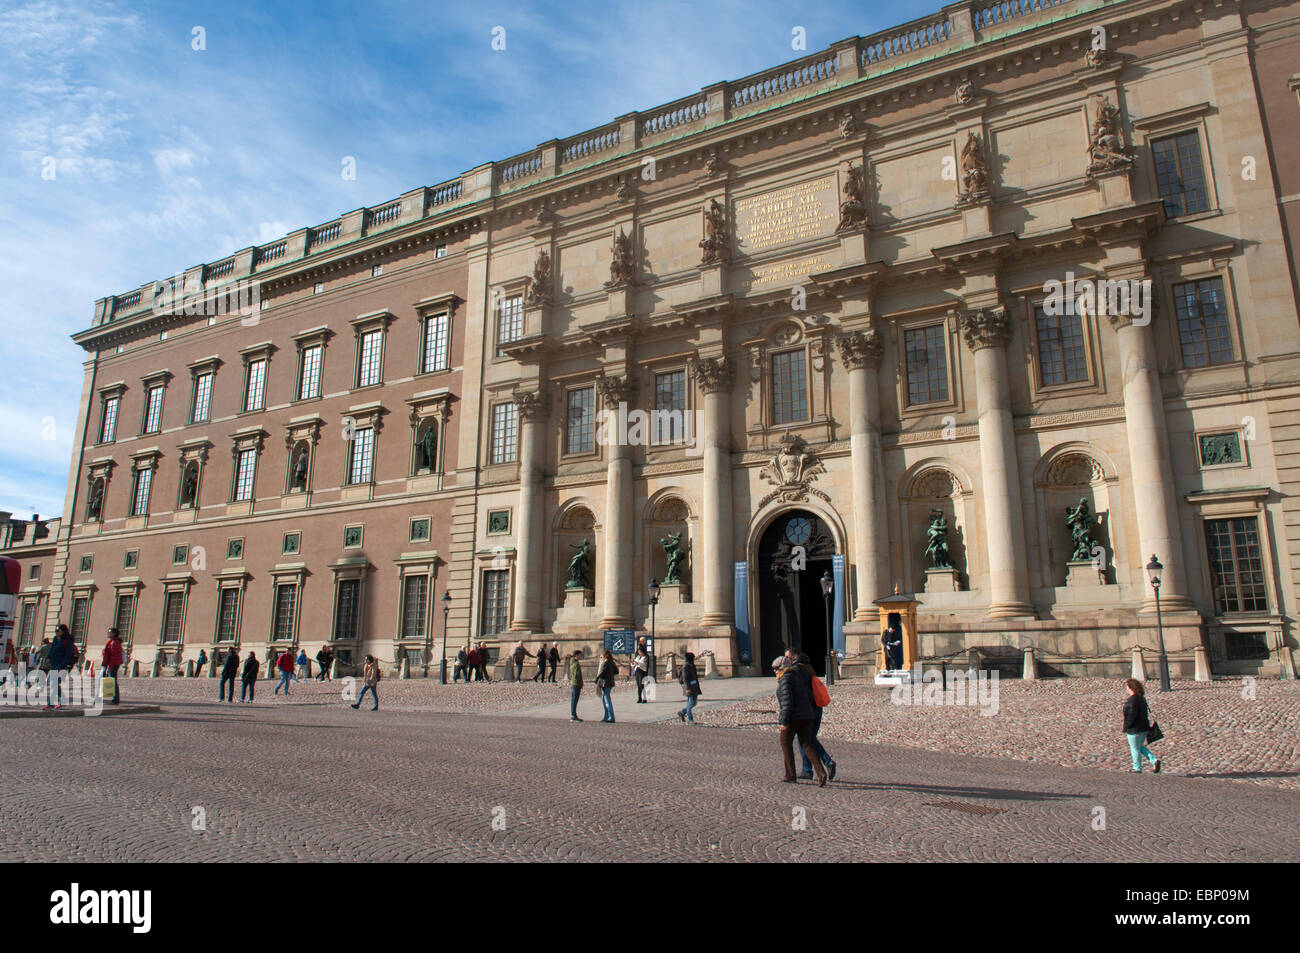 Southern facade of the Royal Palace, Gamla Stan Old Town, Stockholm, Sweden Stock Photo